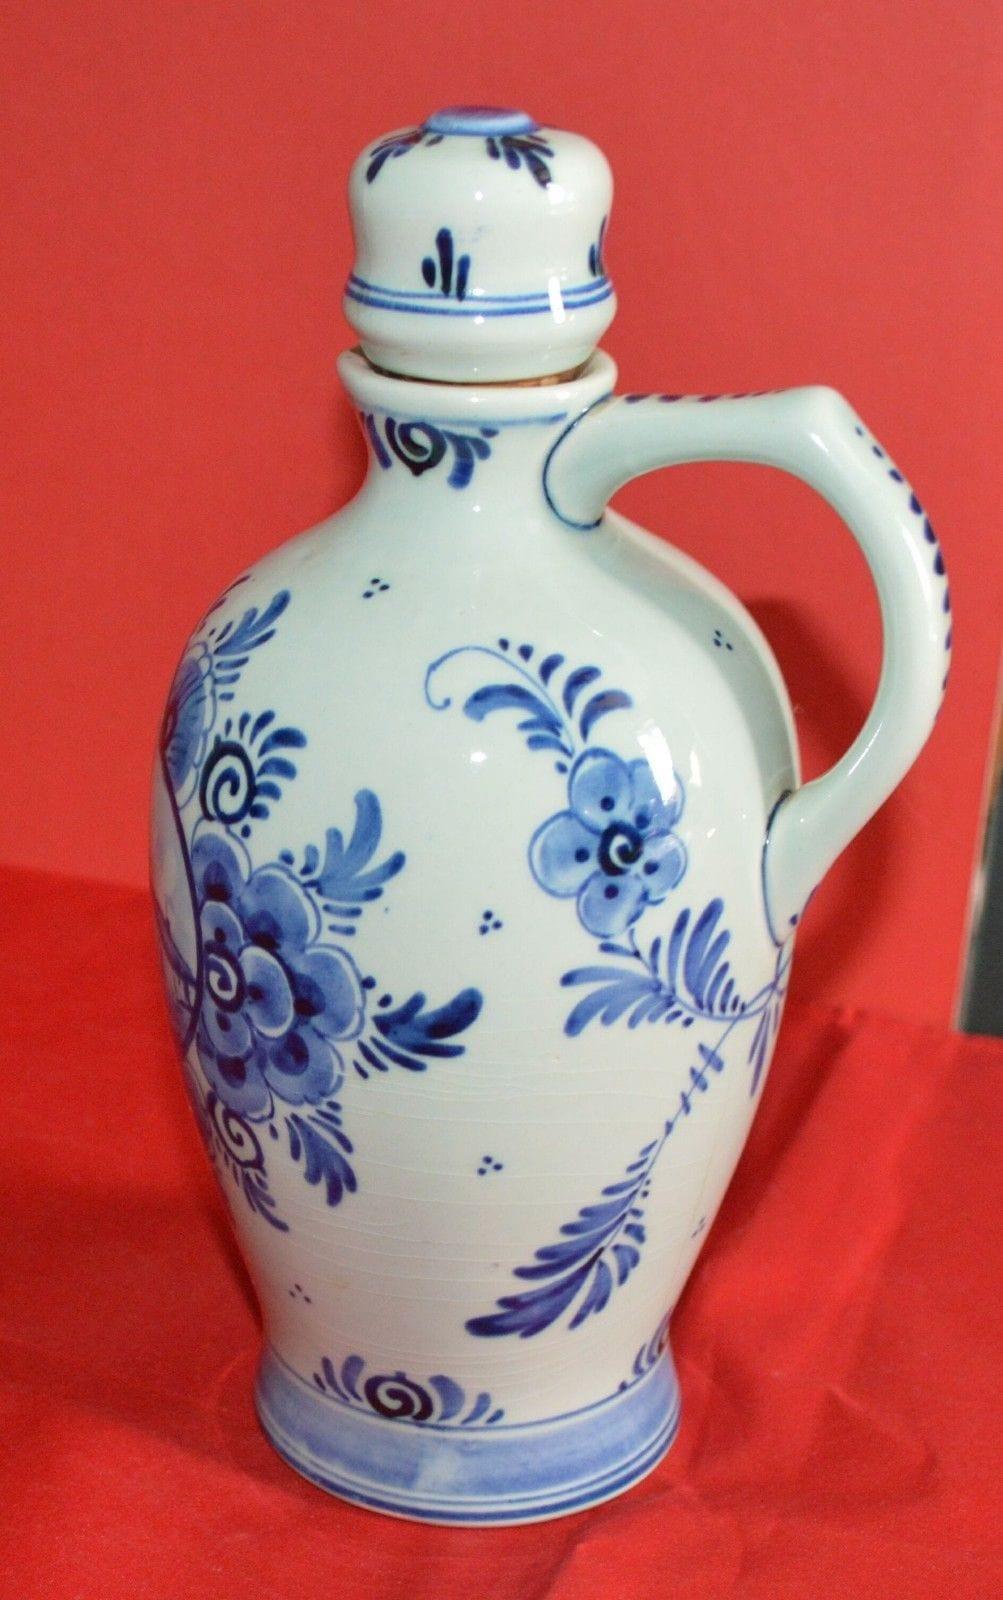 VINTAGE ERVEN LUCAS BOLS DELFT JUG AND STOPPER(PREVIOUSLY OWNED)GOOD CONDITION - TMD167207